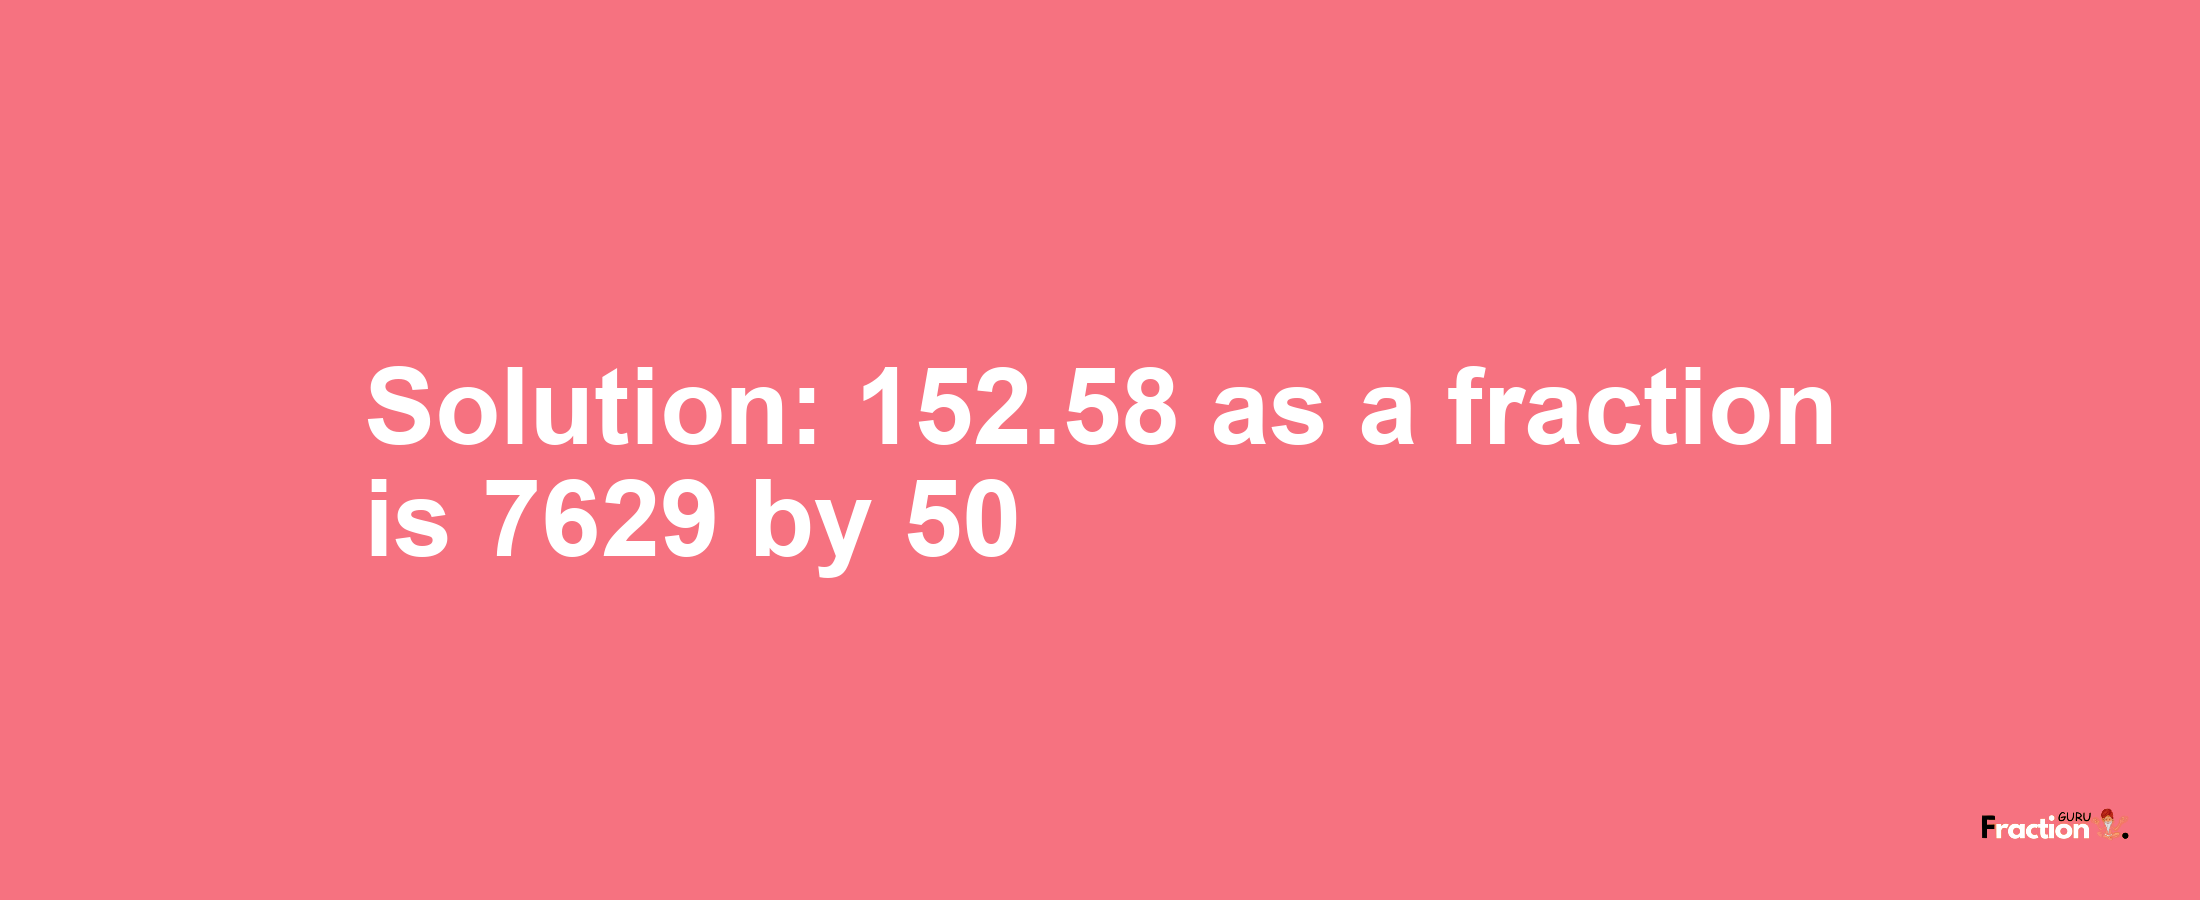 Solution:152.58 as a fraction is 7629/50